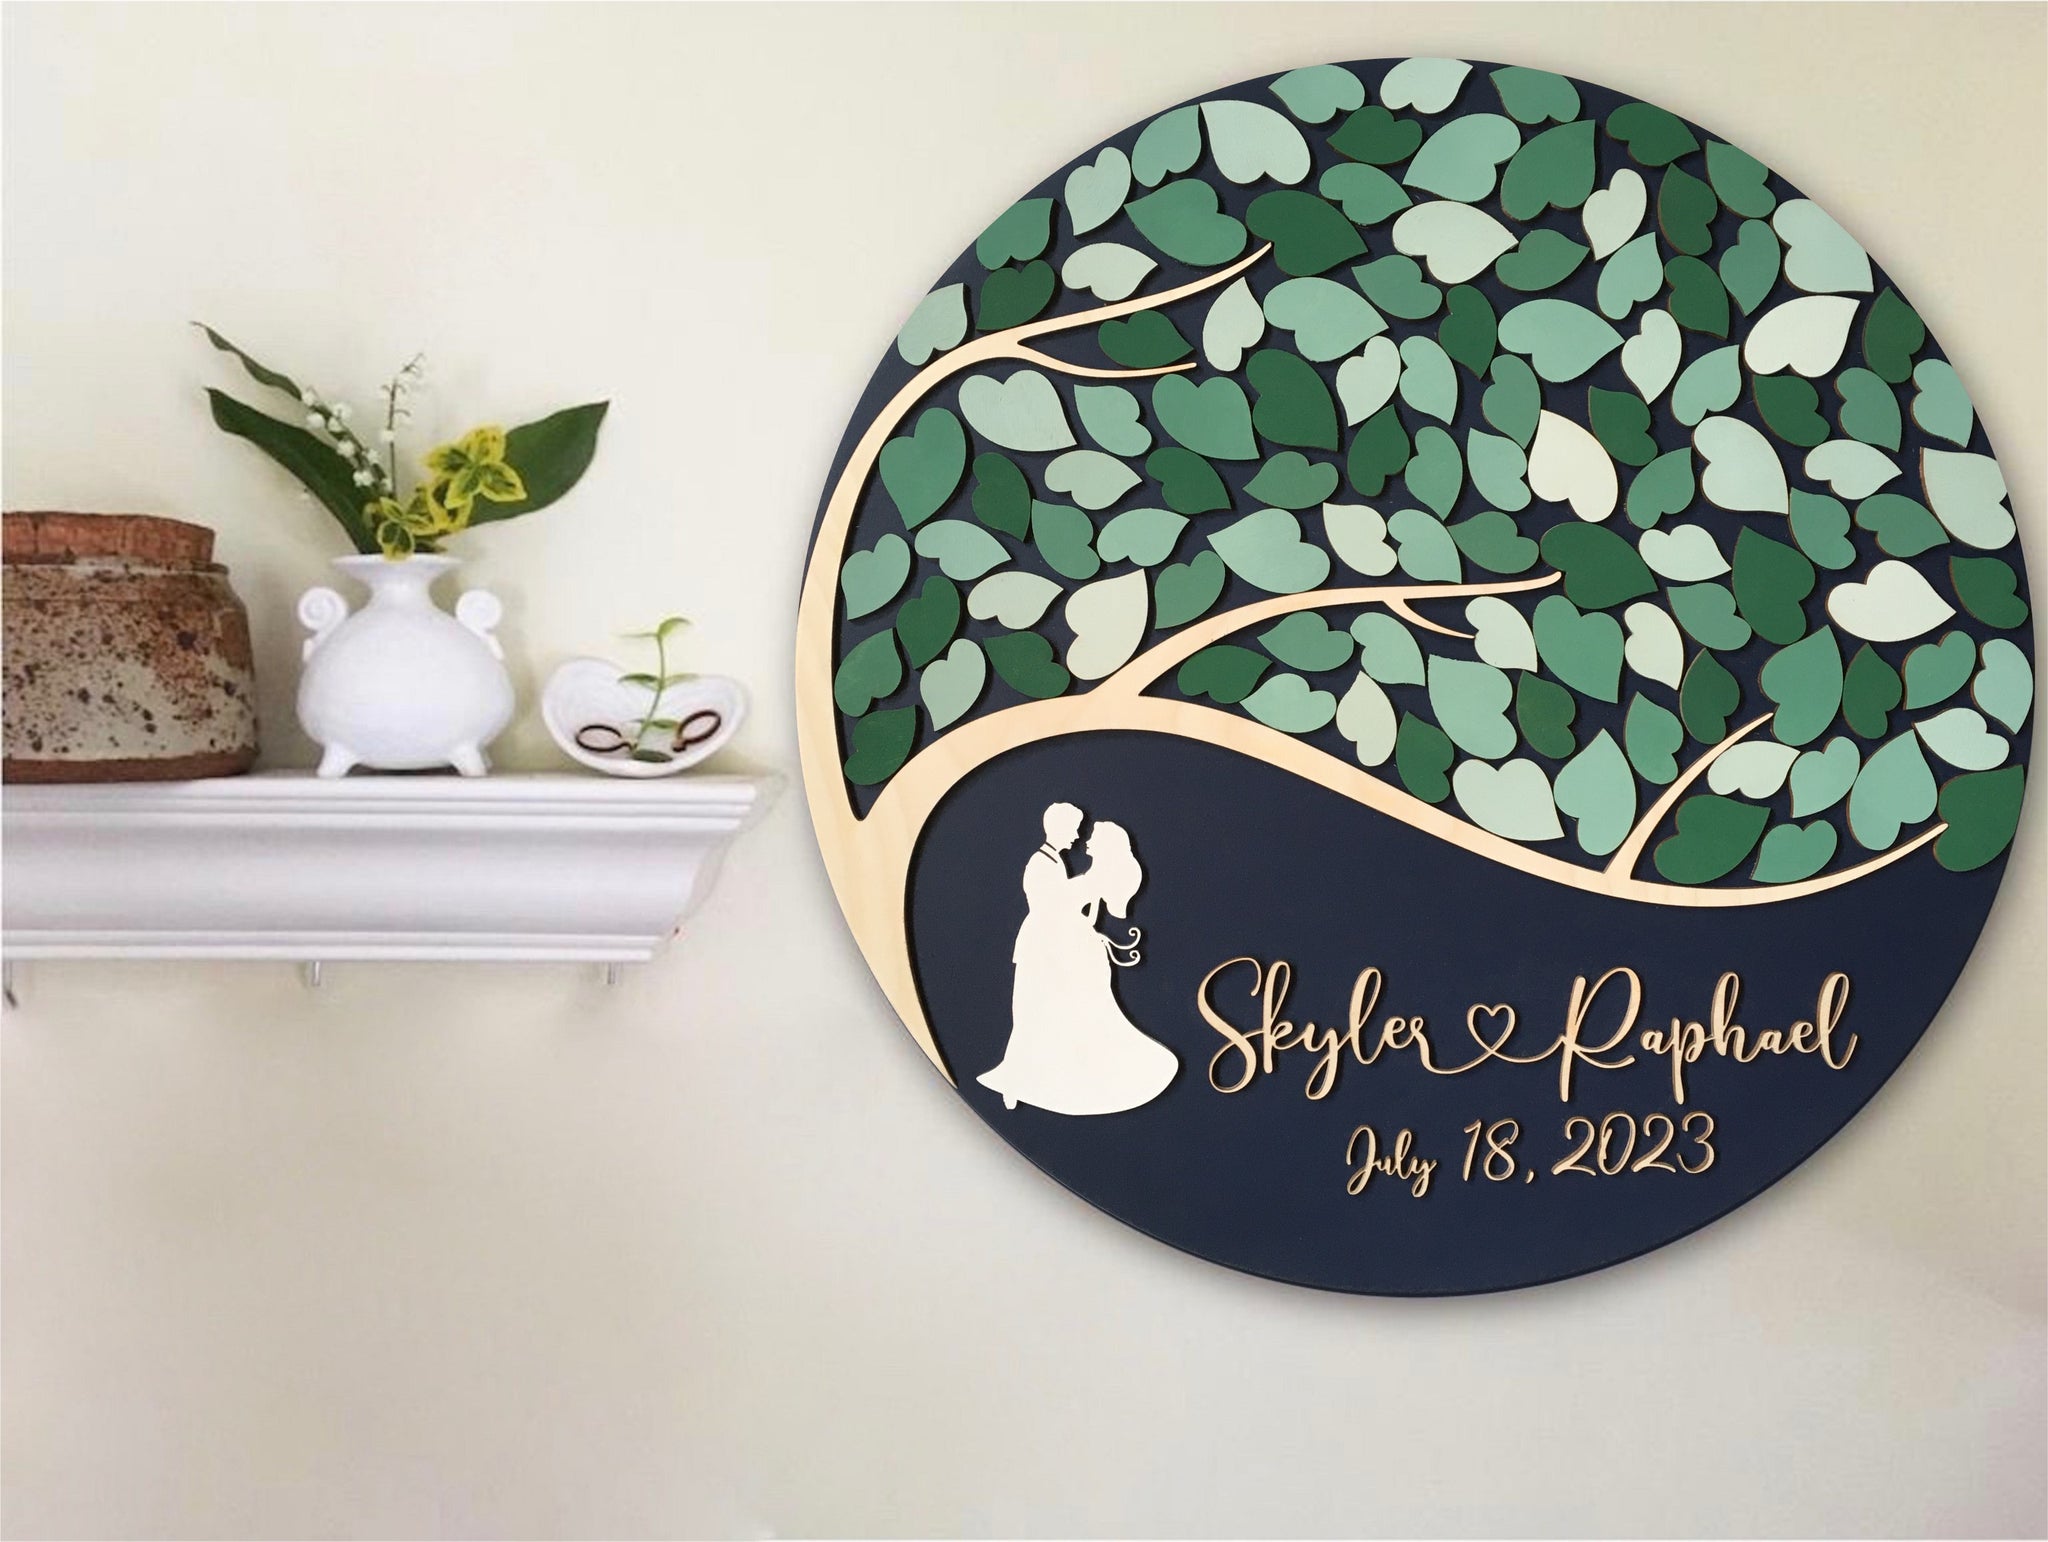 Tree guest book round wedding guestbook alternative with dancing couple, custom guest book with green and sage shades